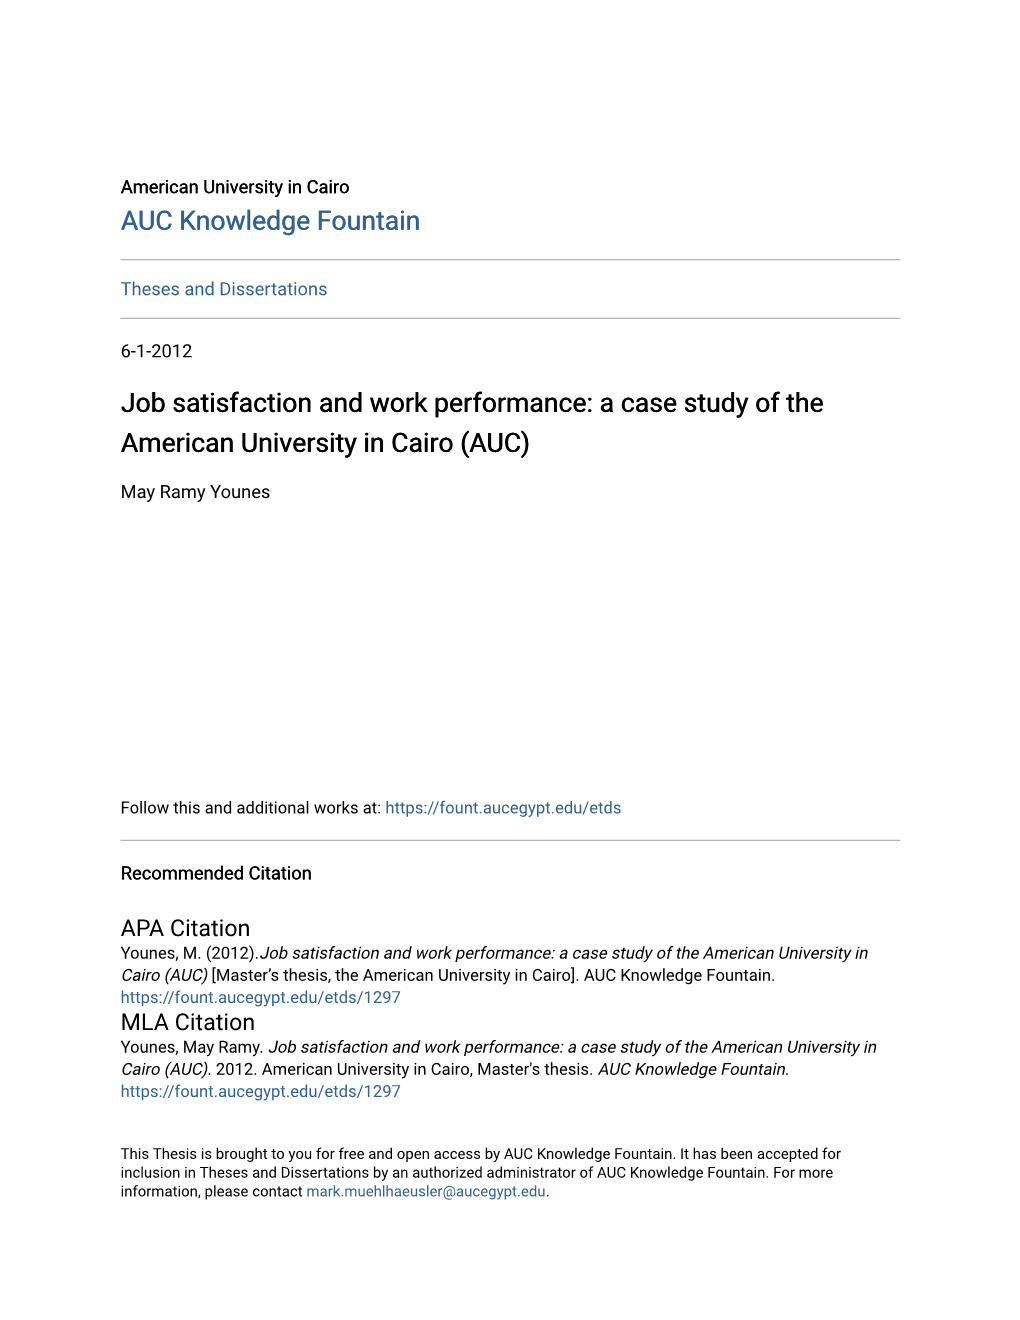 Job Satisfaction and Work Performance: a Case Study of the American University in Cairo (AUC)